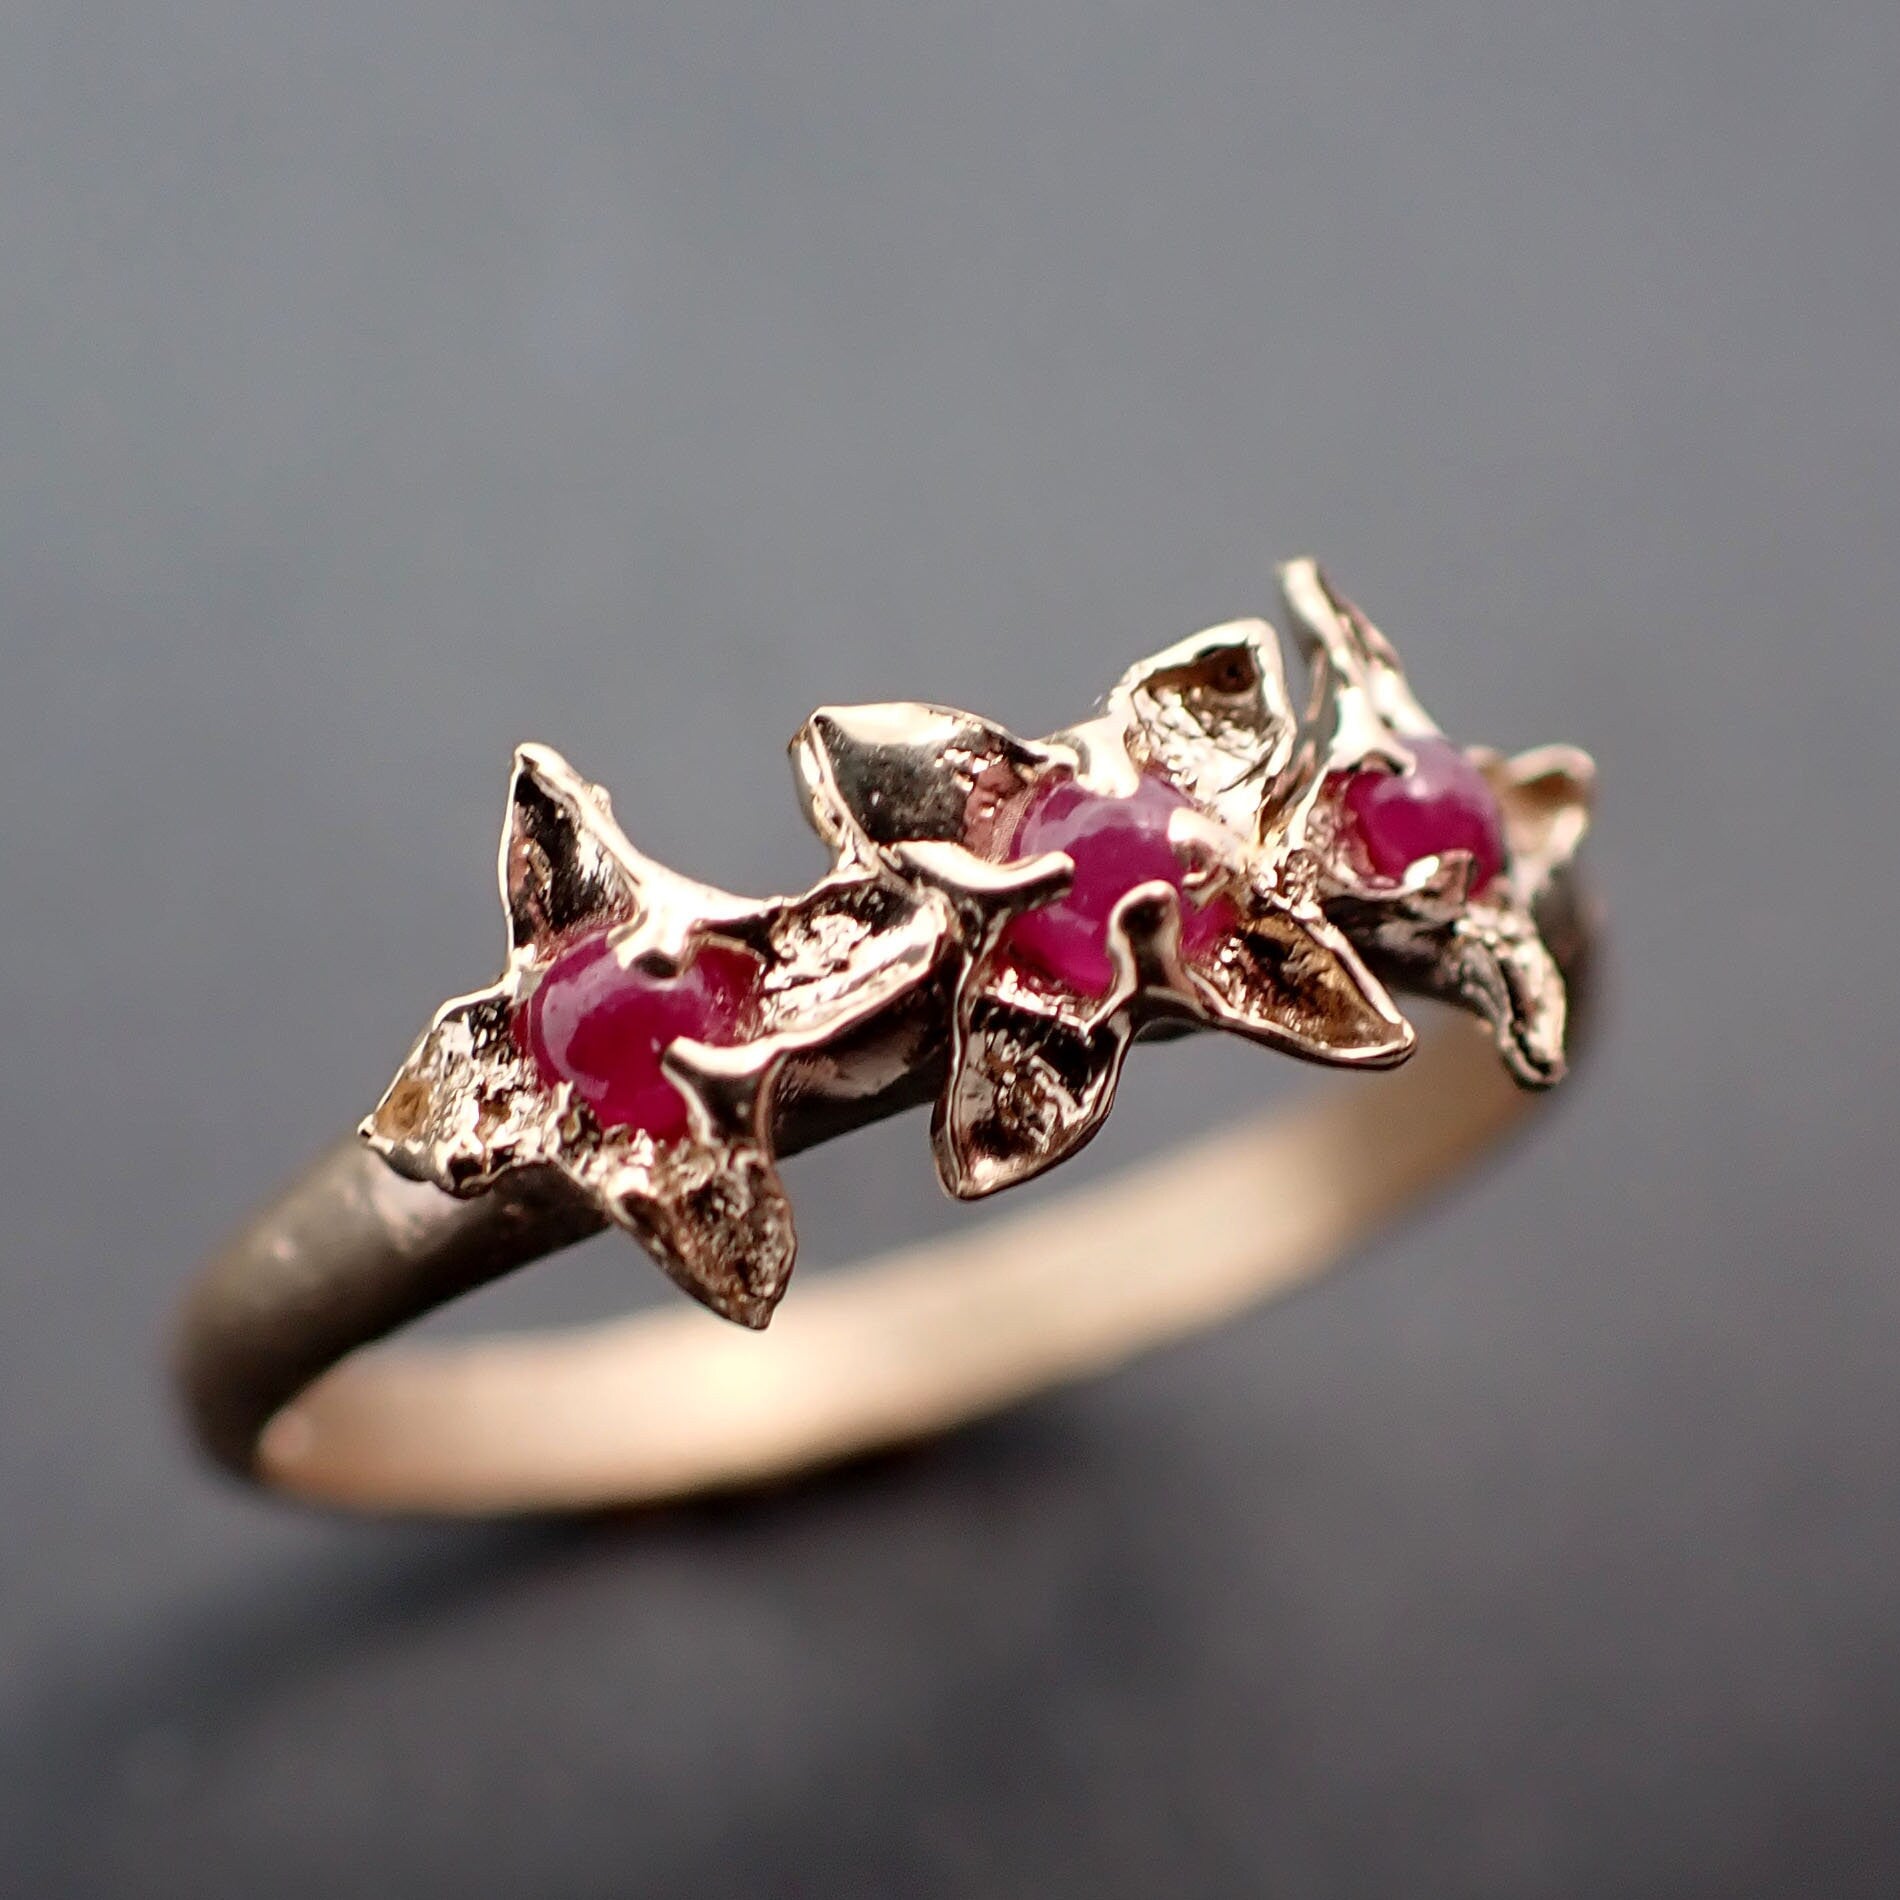 Real Lilac Flower casting with faceted Rubies 14k Yellow gold multi stone Enchanted Garden Floral Ring byAngeline 3376